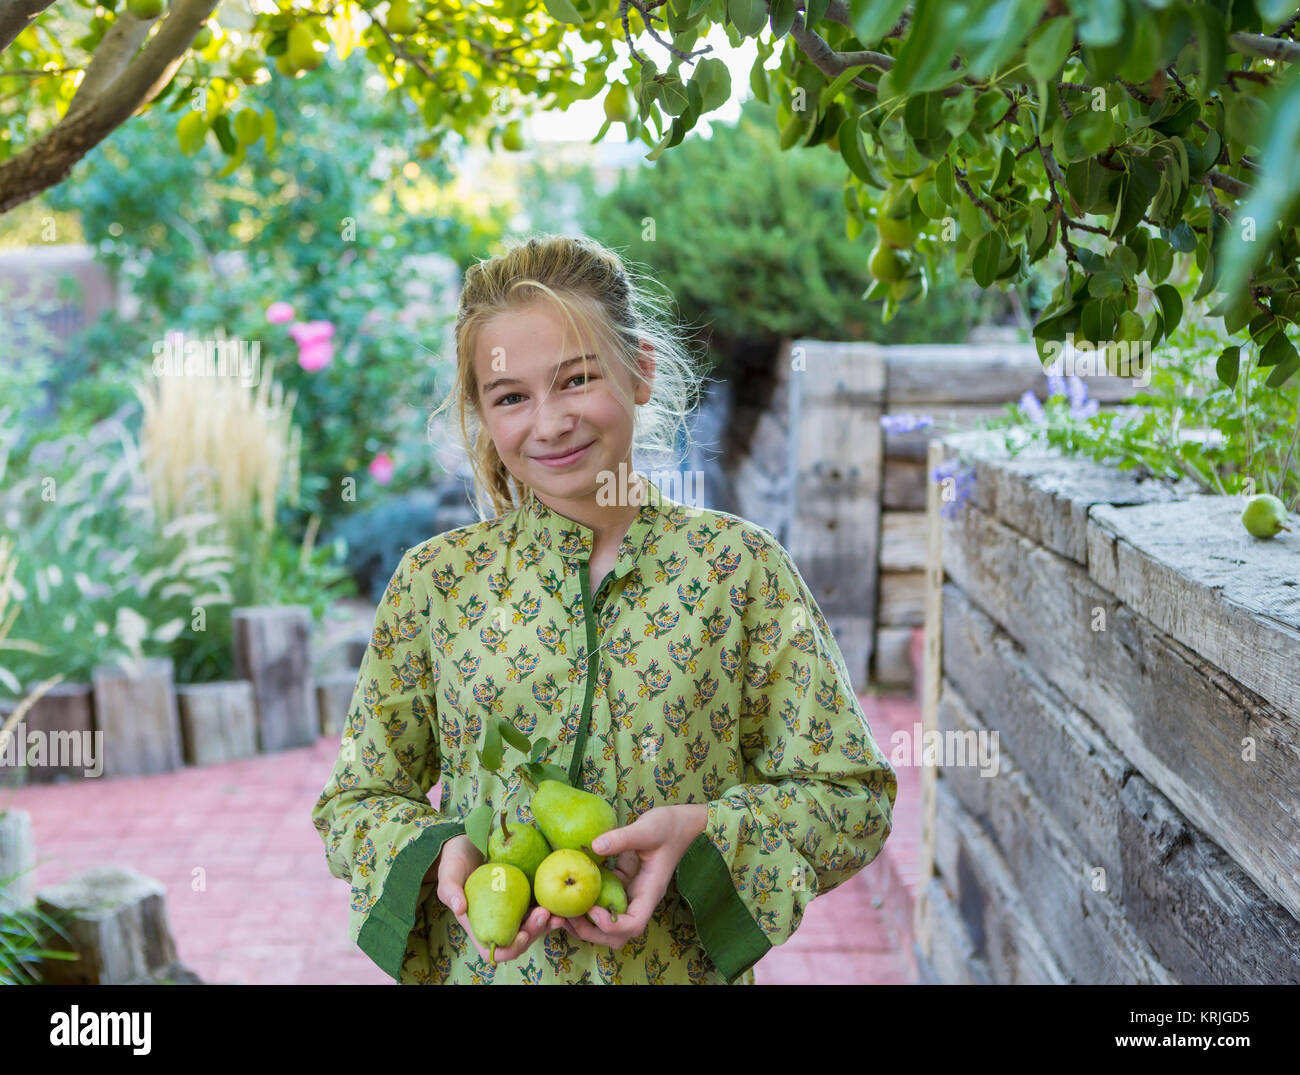 Portrait of smiling Caucasian girl holding pears Stock Photo